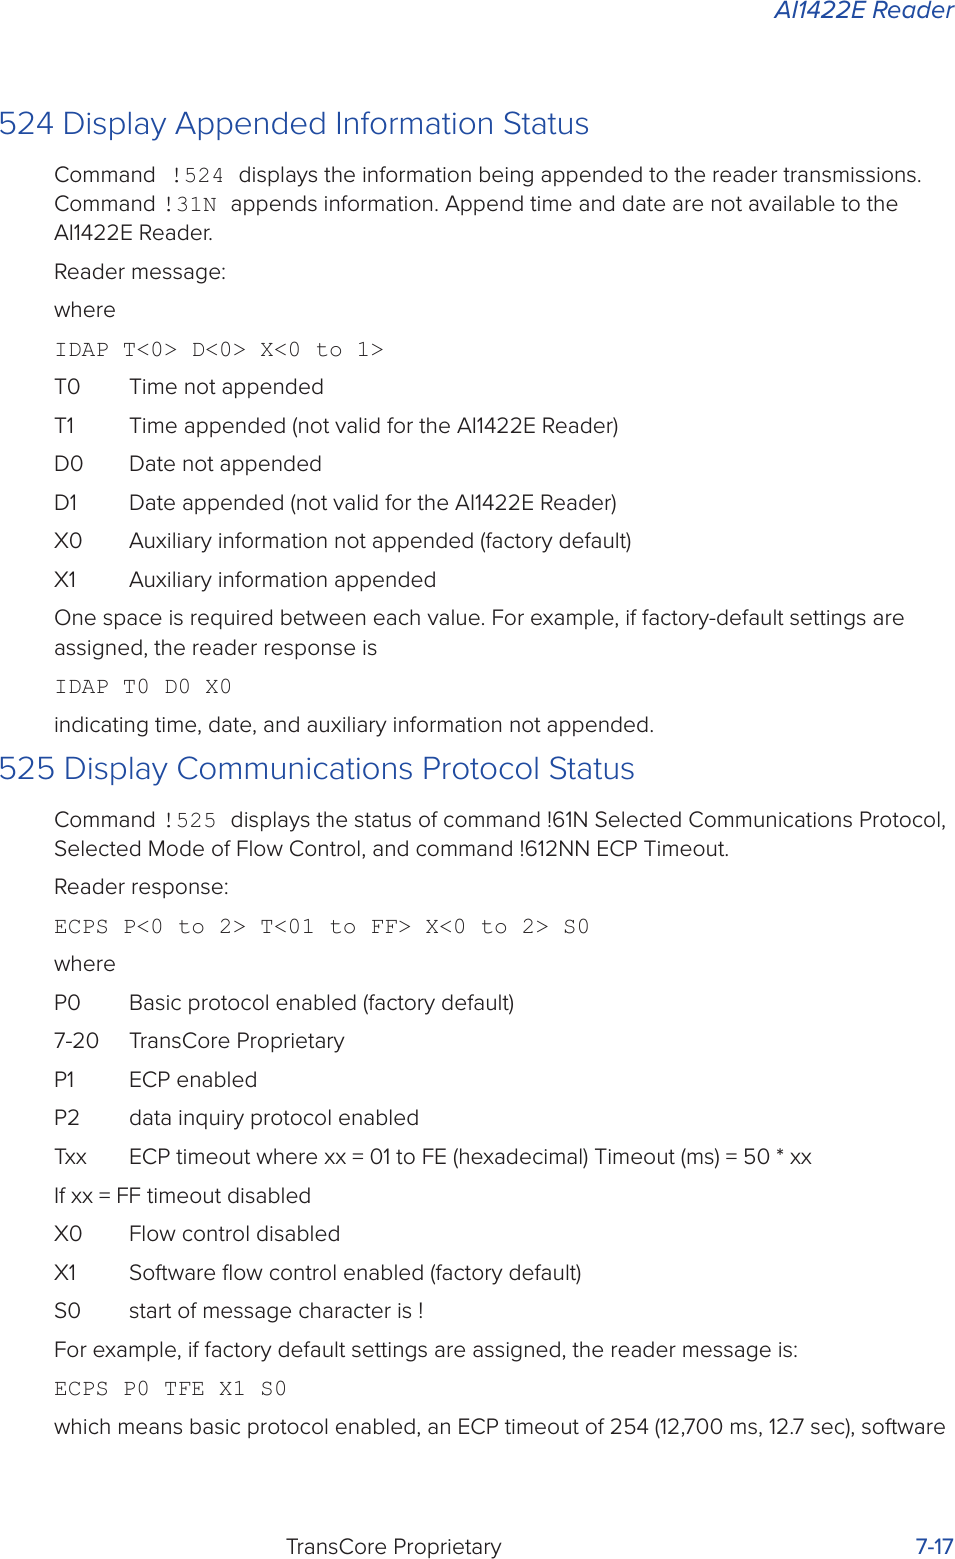 AI1422E ReaderTransCore Proprietary 7-17524 Display Appended Information StatusCommand !524 displays the information being appended to the reader transmissions. Command !31N appends information. Append time and date are not available to the AI1422E Reader.Reader message:whereIDAP T&lt;0&gt; D&lt;0&gt; X&lt;0 to 1&gt;T0  Time not appendedT1  Time appended (not valid for the AI1422E Reader)D0  Date not appendedD1  Date appended (not valid for the AI1422E Reader)X0  Auxiliary information not appended (factory default)X1  Auxiliary information appendedOne space is required between each value. For example, if factory-default settings are assigned, the reader response isIDAP T0 D0 X0indicating time, date, and auxiliary information not appended.525 Display Communications Protocol StatusCommand !525 displays the status of command !61N Selected Communications Protocol, Selected Mode of Flow Control, and command !612NN ECP Timeout.Reader response:ECPS P&lt;0 to 2&gt; T&lt;01 to FF&gt; X&lt;0 to 2&gt; S0whereP0  Basic protocol enabled (factory default)7-20  TransCore ProprietaryP1  ECP enabledP2  data inquiry protocol enabledTxx  ECP timeout where xx = 01 to FE (hexadecimal) Timeout (ms) = 50 * xxIf xx = FF timeout disabledX0  Flow control disabledX1  Software ﬂow control enabled (factory default)S0  start of message character is !For example, if factory default settings are assigned, the reader message is:ECPS P0 TFE X1 S0which means basic protocol enabled, an ECP timeout of 254 (12,700 ms, 12.7 sec), software 